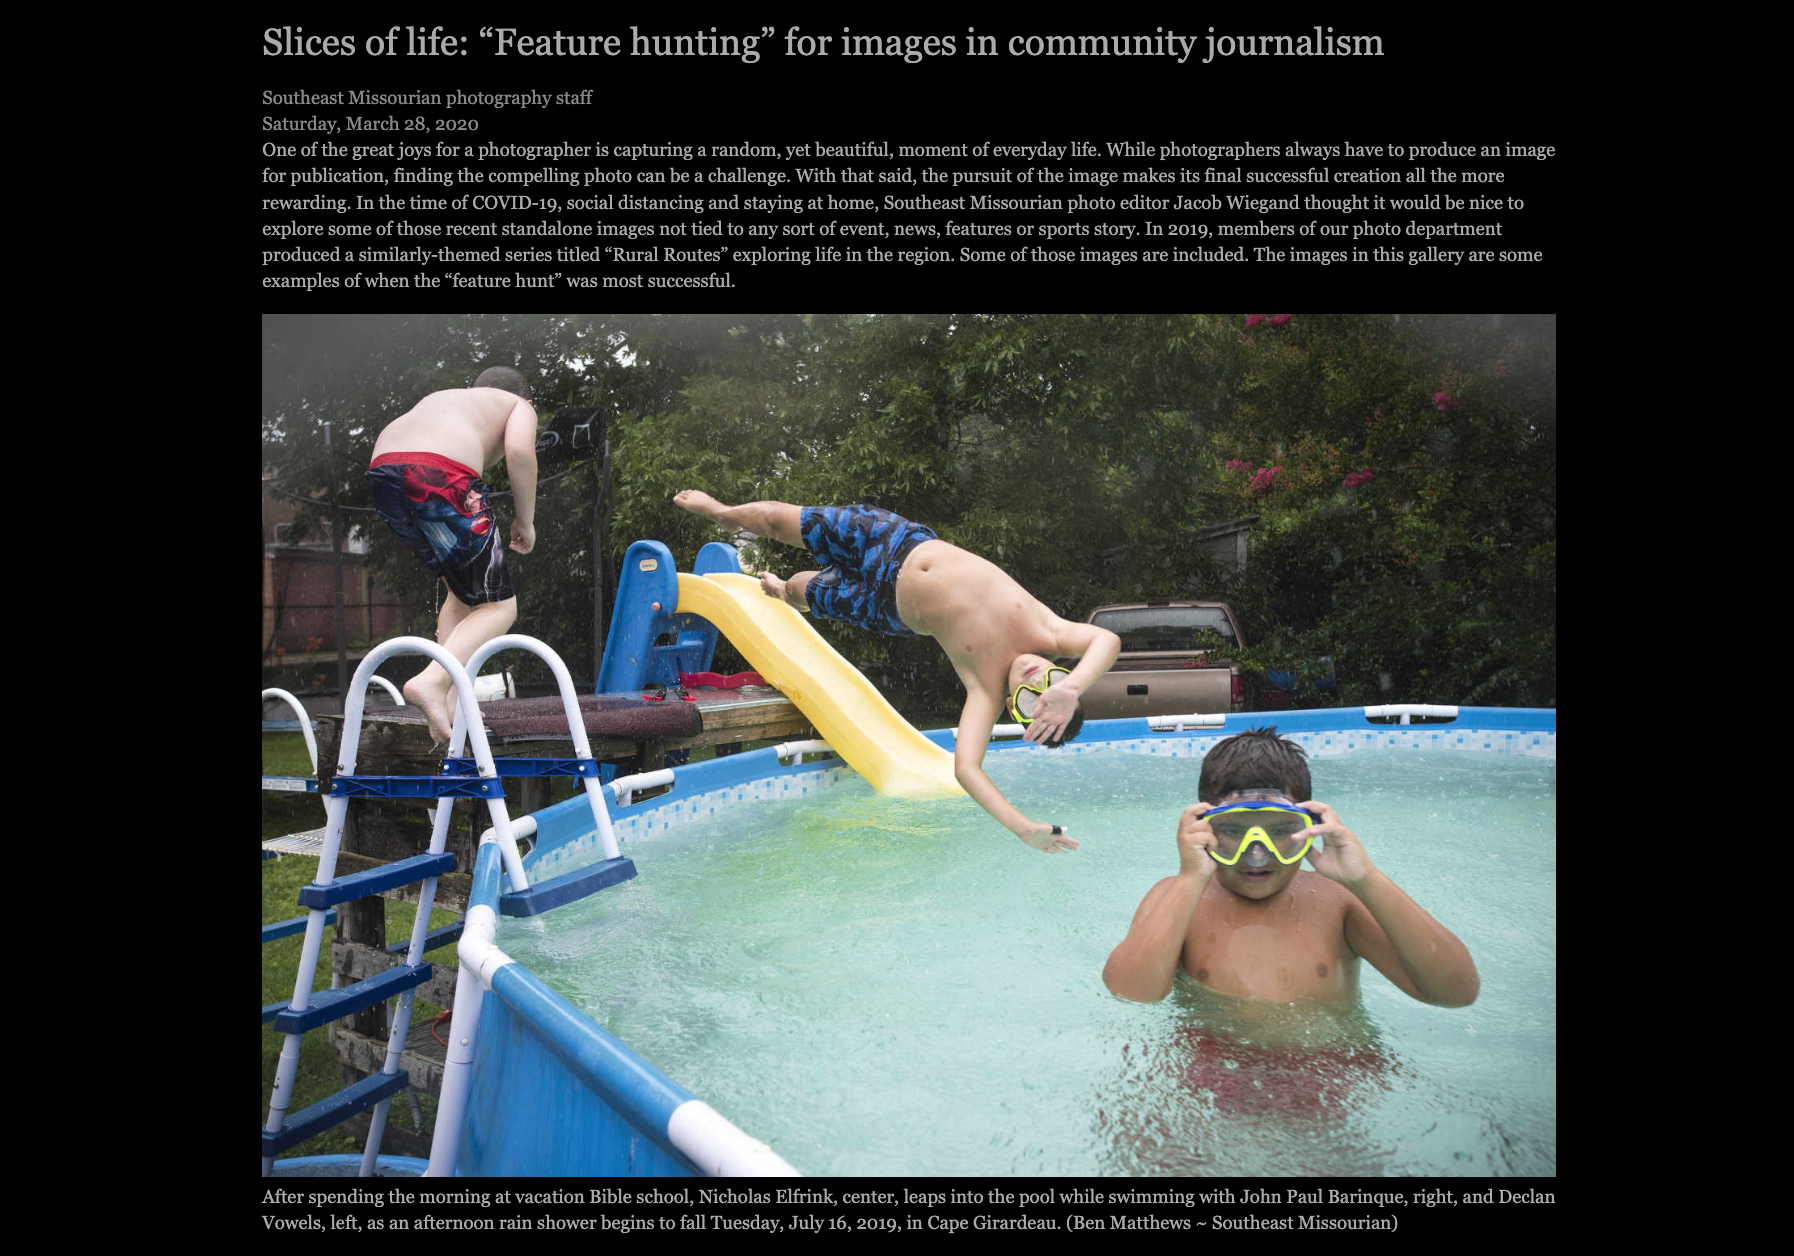     Slices of life: “Feature hunting” for images in community journalism gallery link    